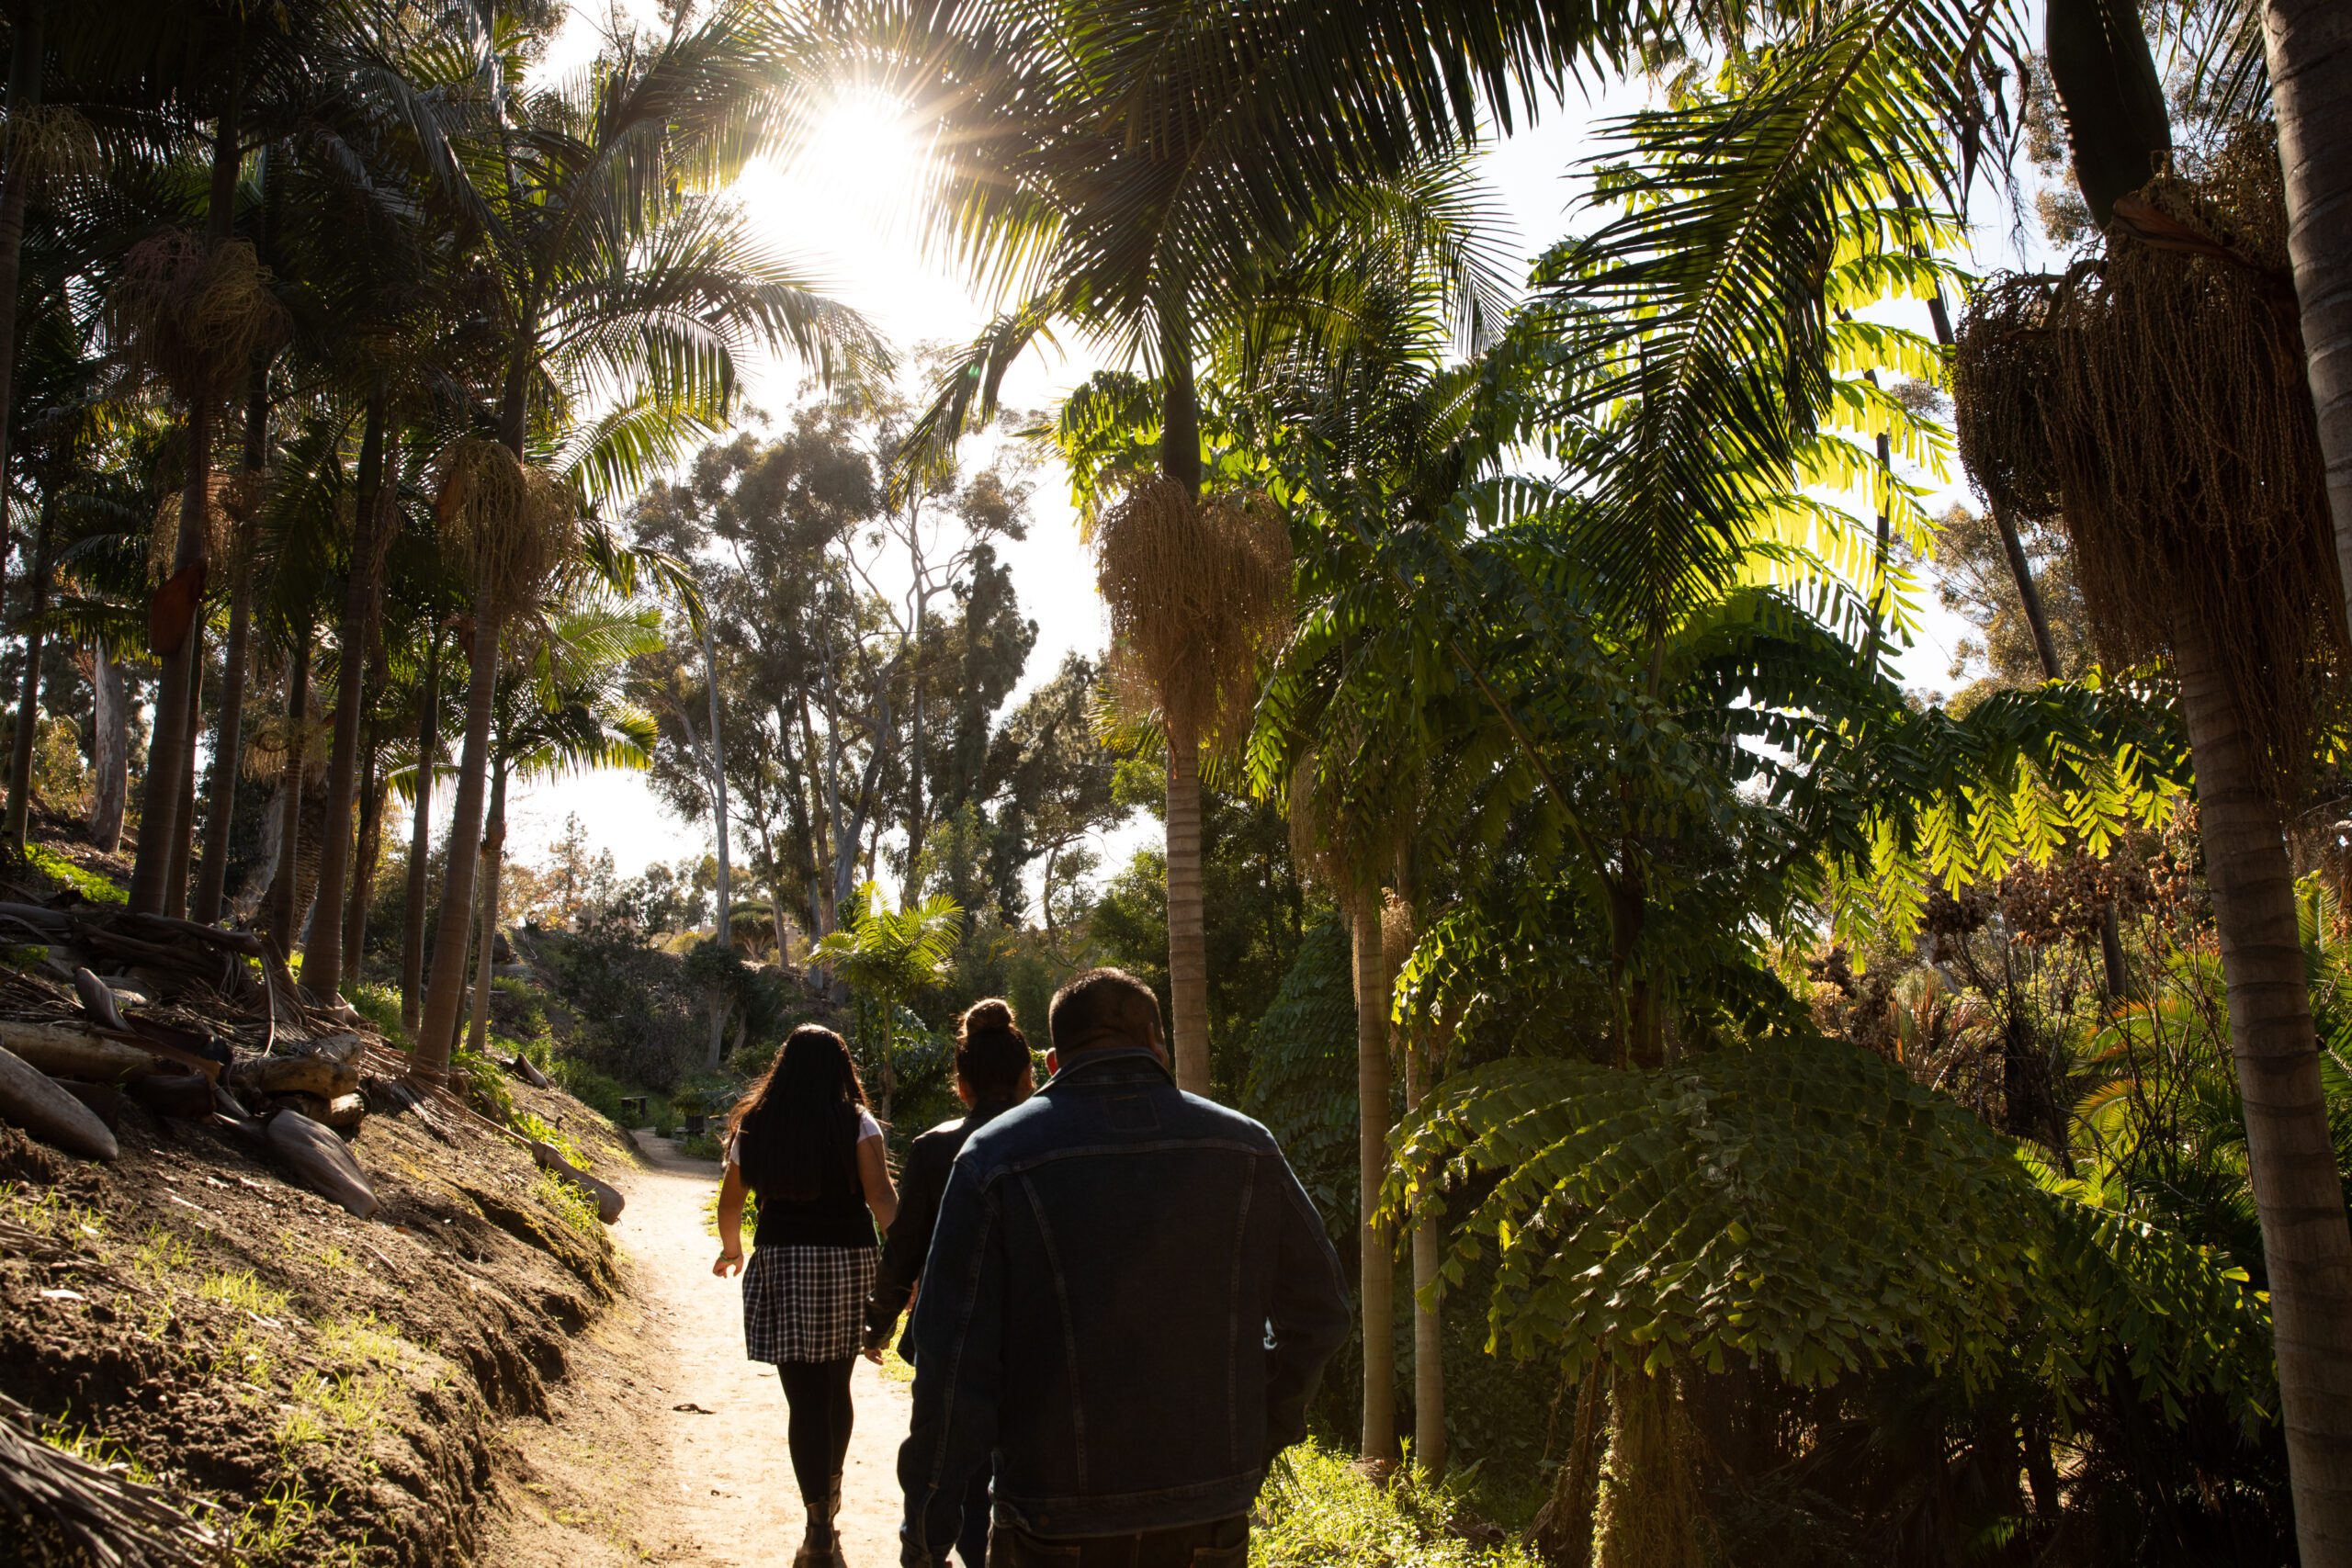 A group of people walking along a dirt path in Palm Canyon in Balboa Park.